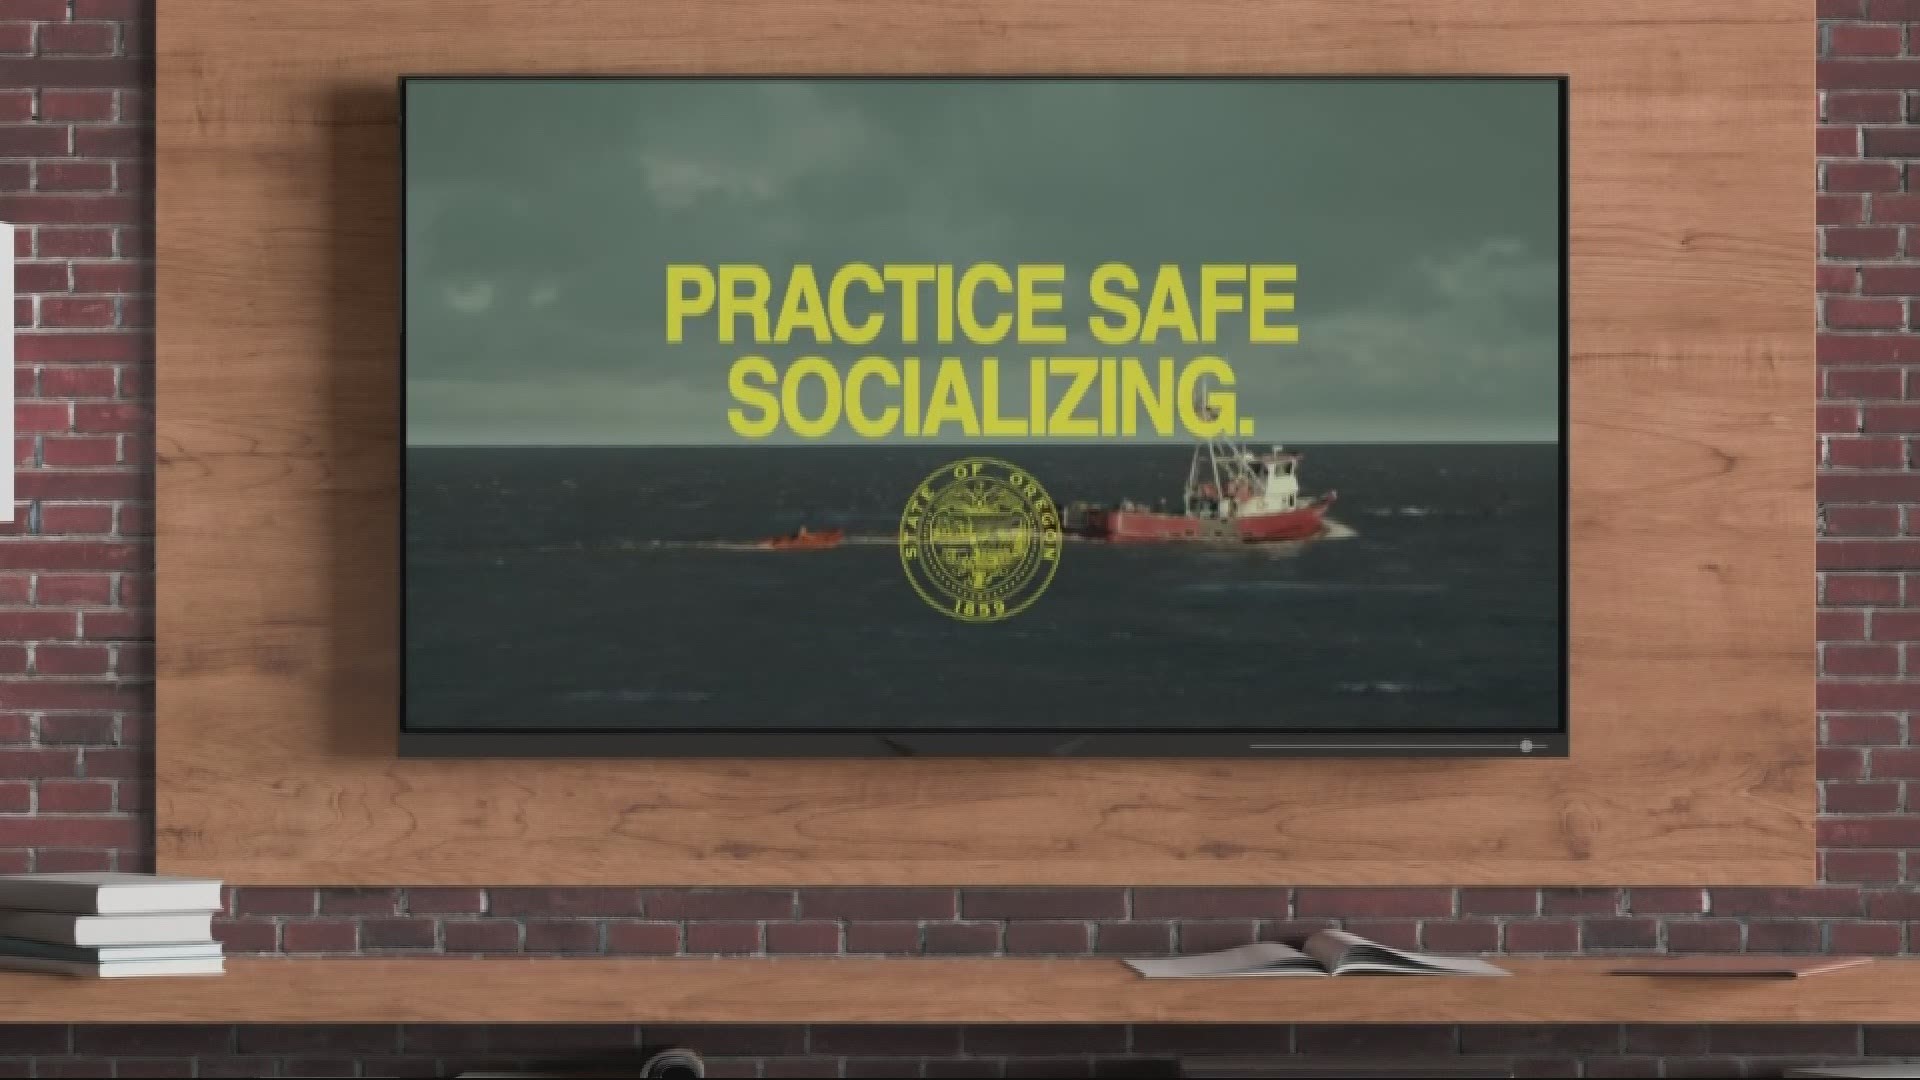 The ad, which depicts a group of fishermen tossing a man overboard onto a lifeboat to practice social distancing, did not sit well with the residents of Newport.